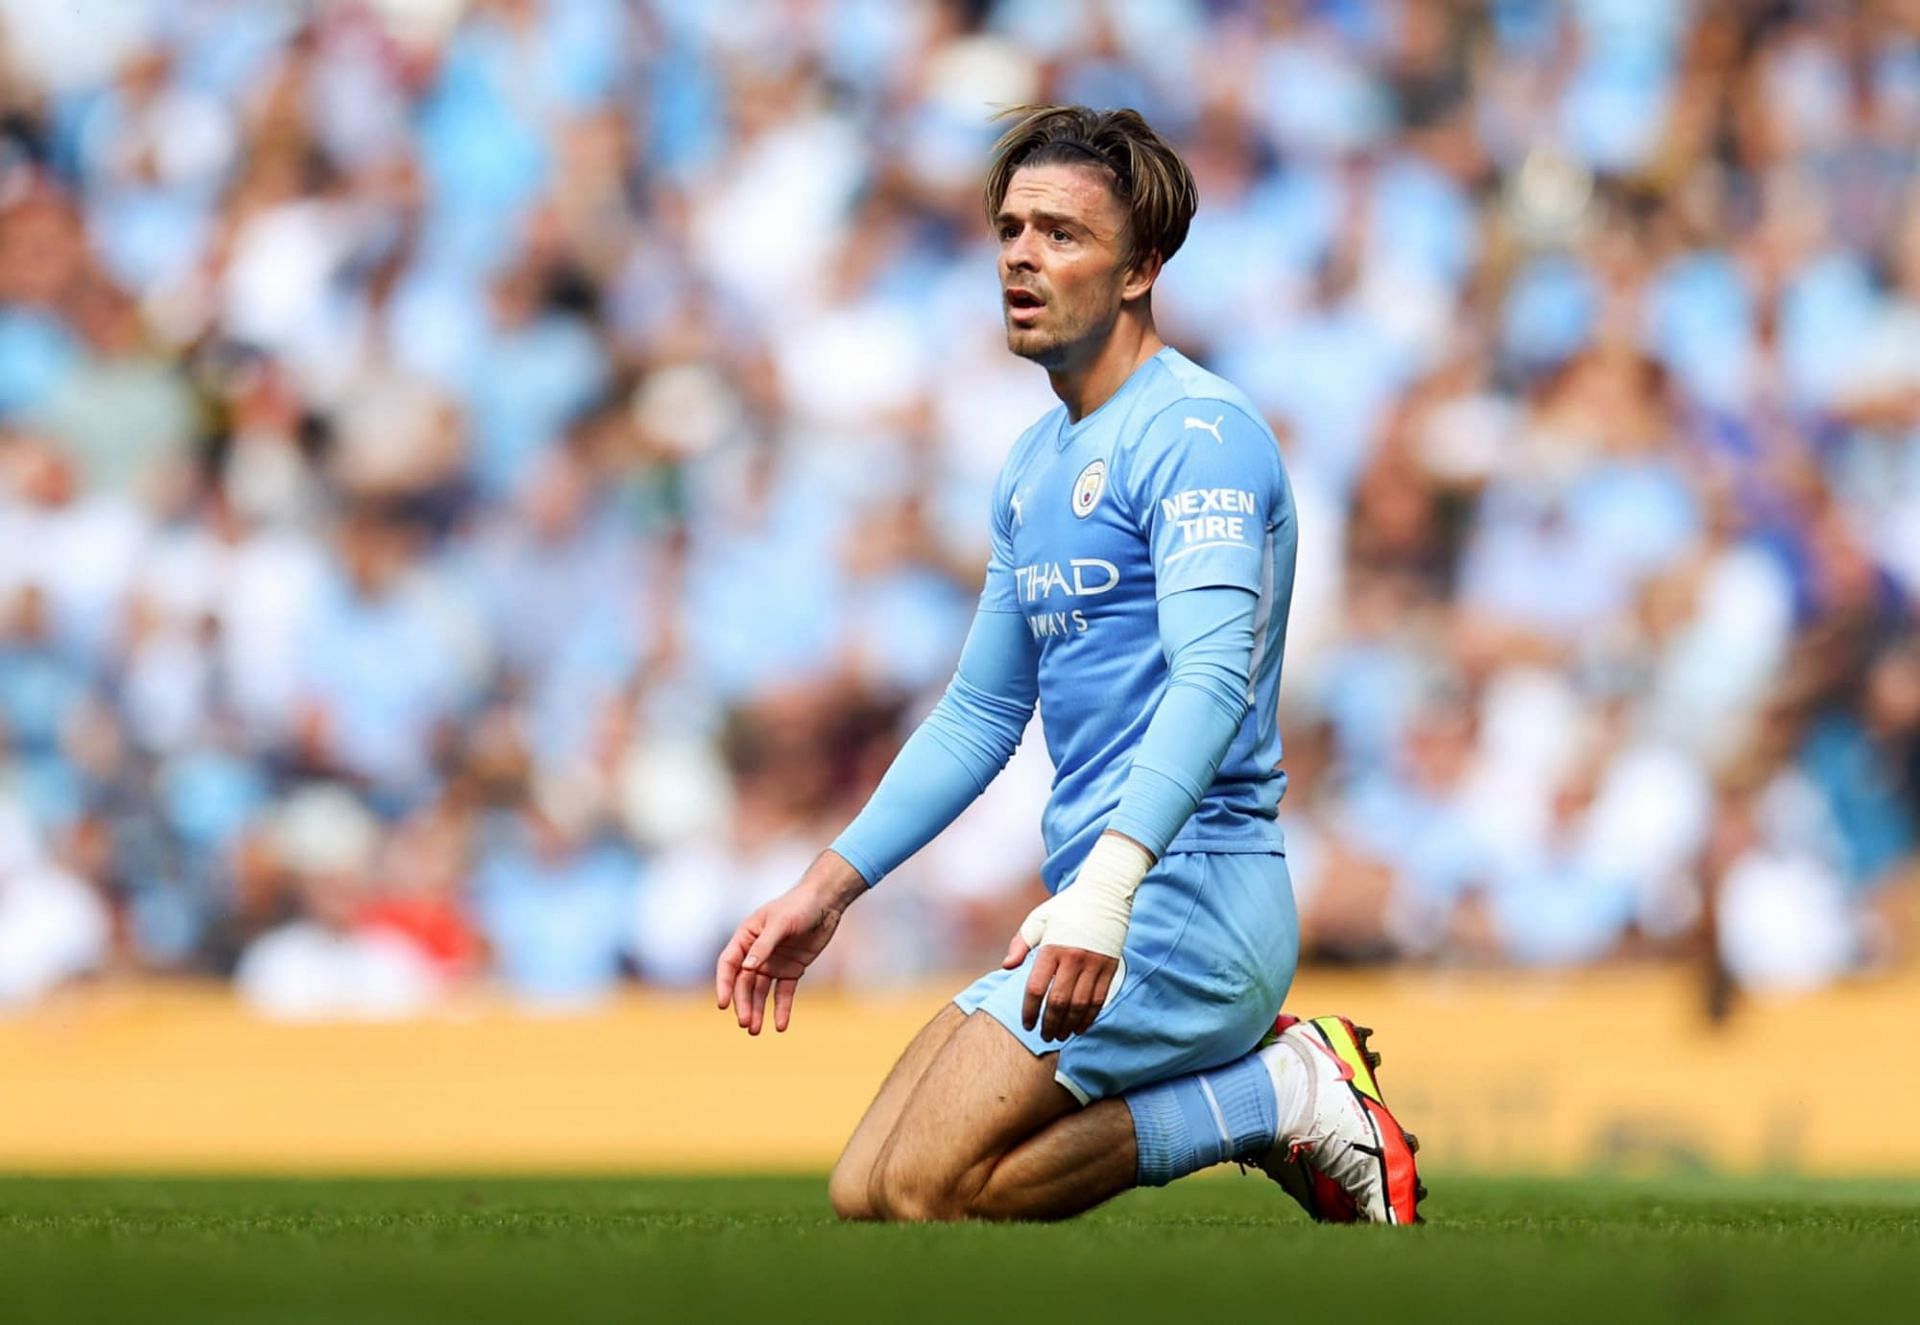 Jack Grealish is all set to make his Manchester derby debut.